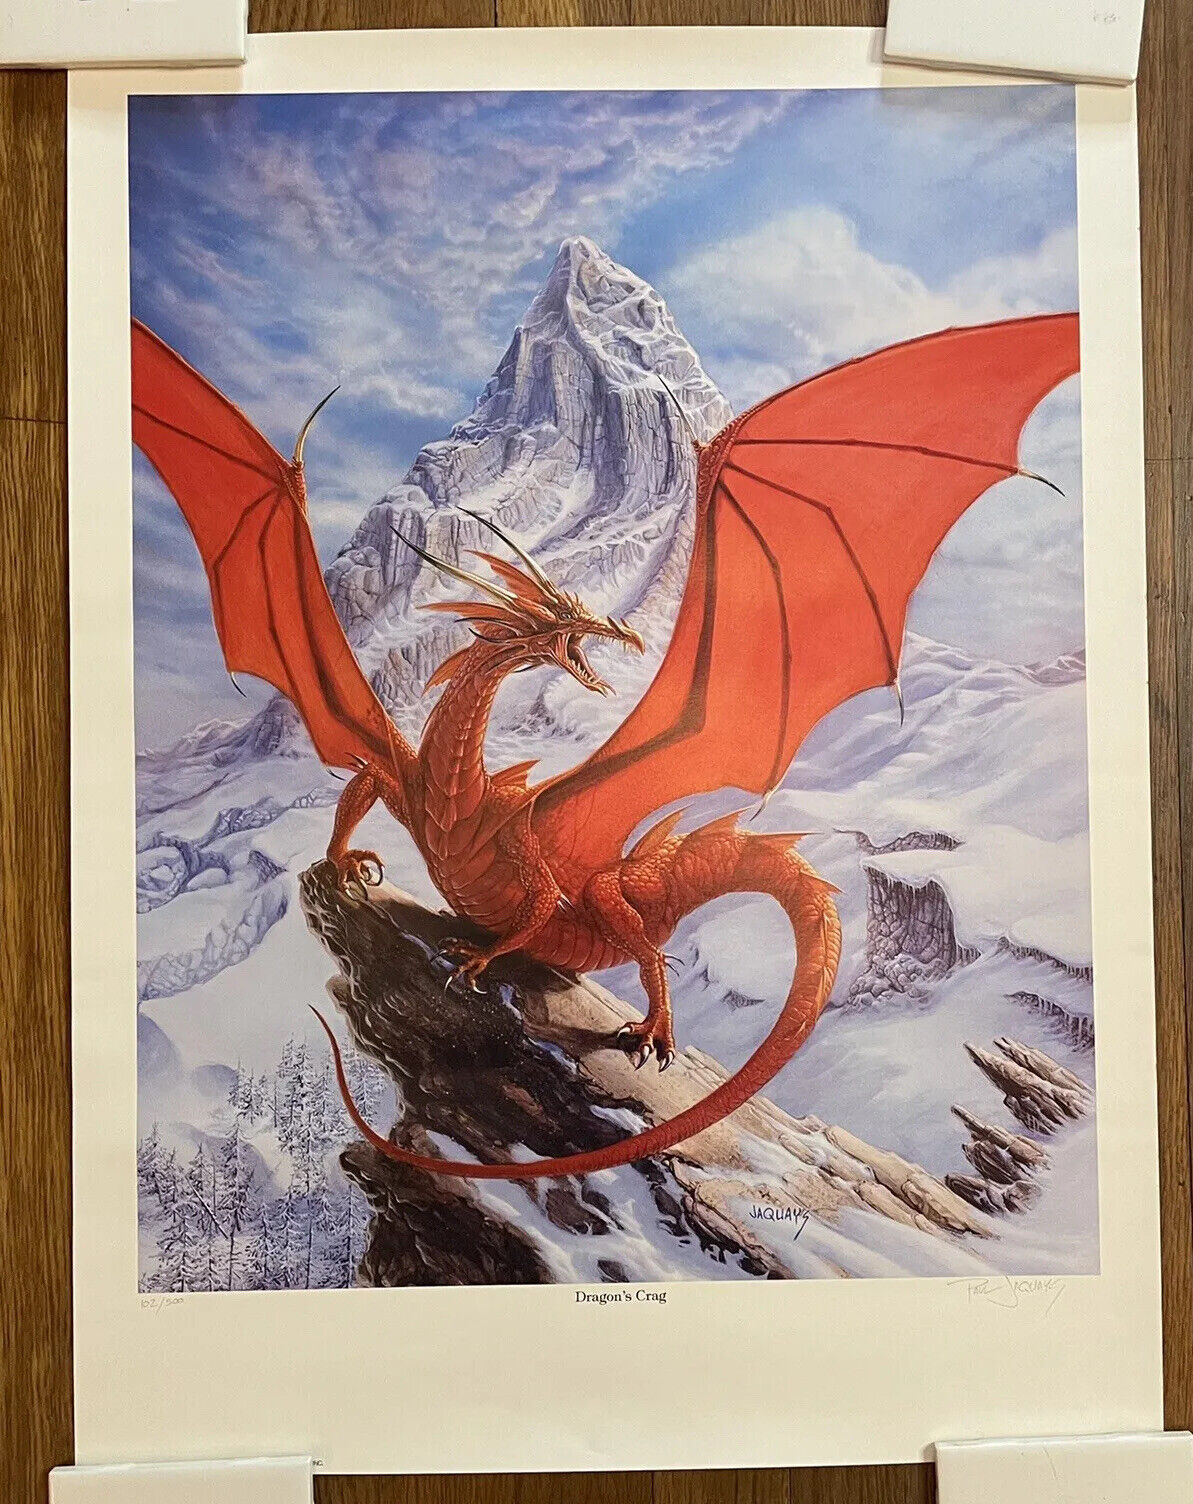 Vintage 1994 Paul Jannell Jaquays Dragon’s Crag Print Numbered Signed 102/500